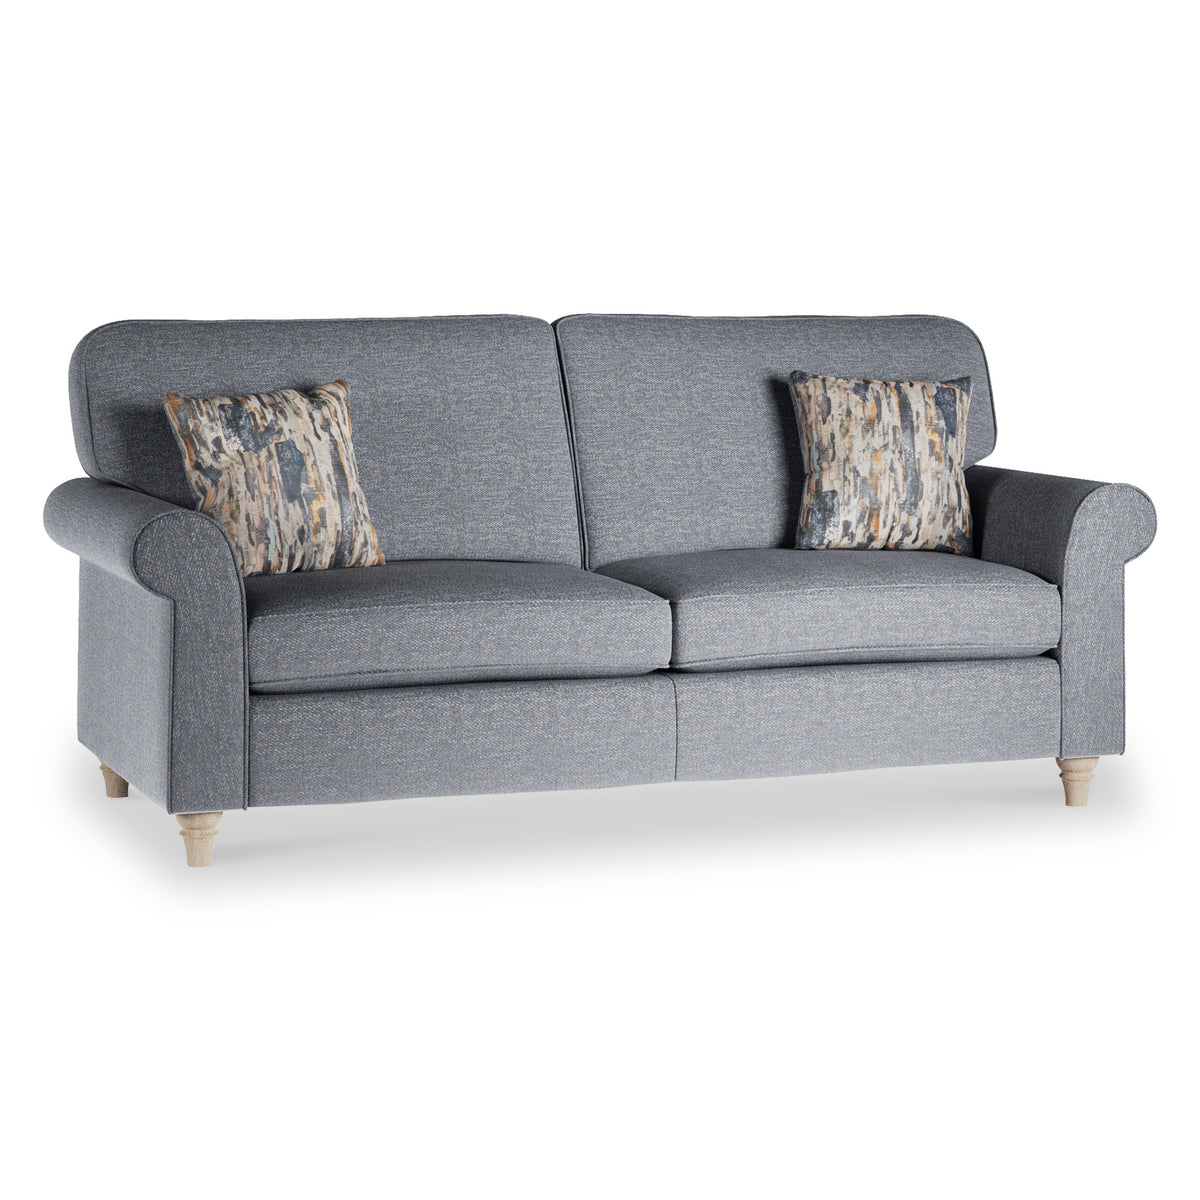 Jude Thunderstorm 3 Seater Sofa from Roseland Furniture